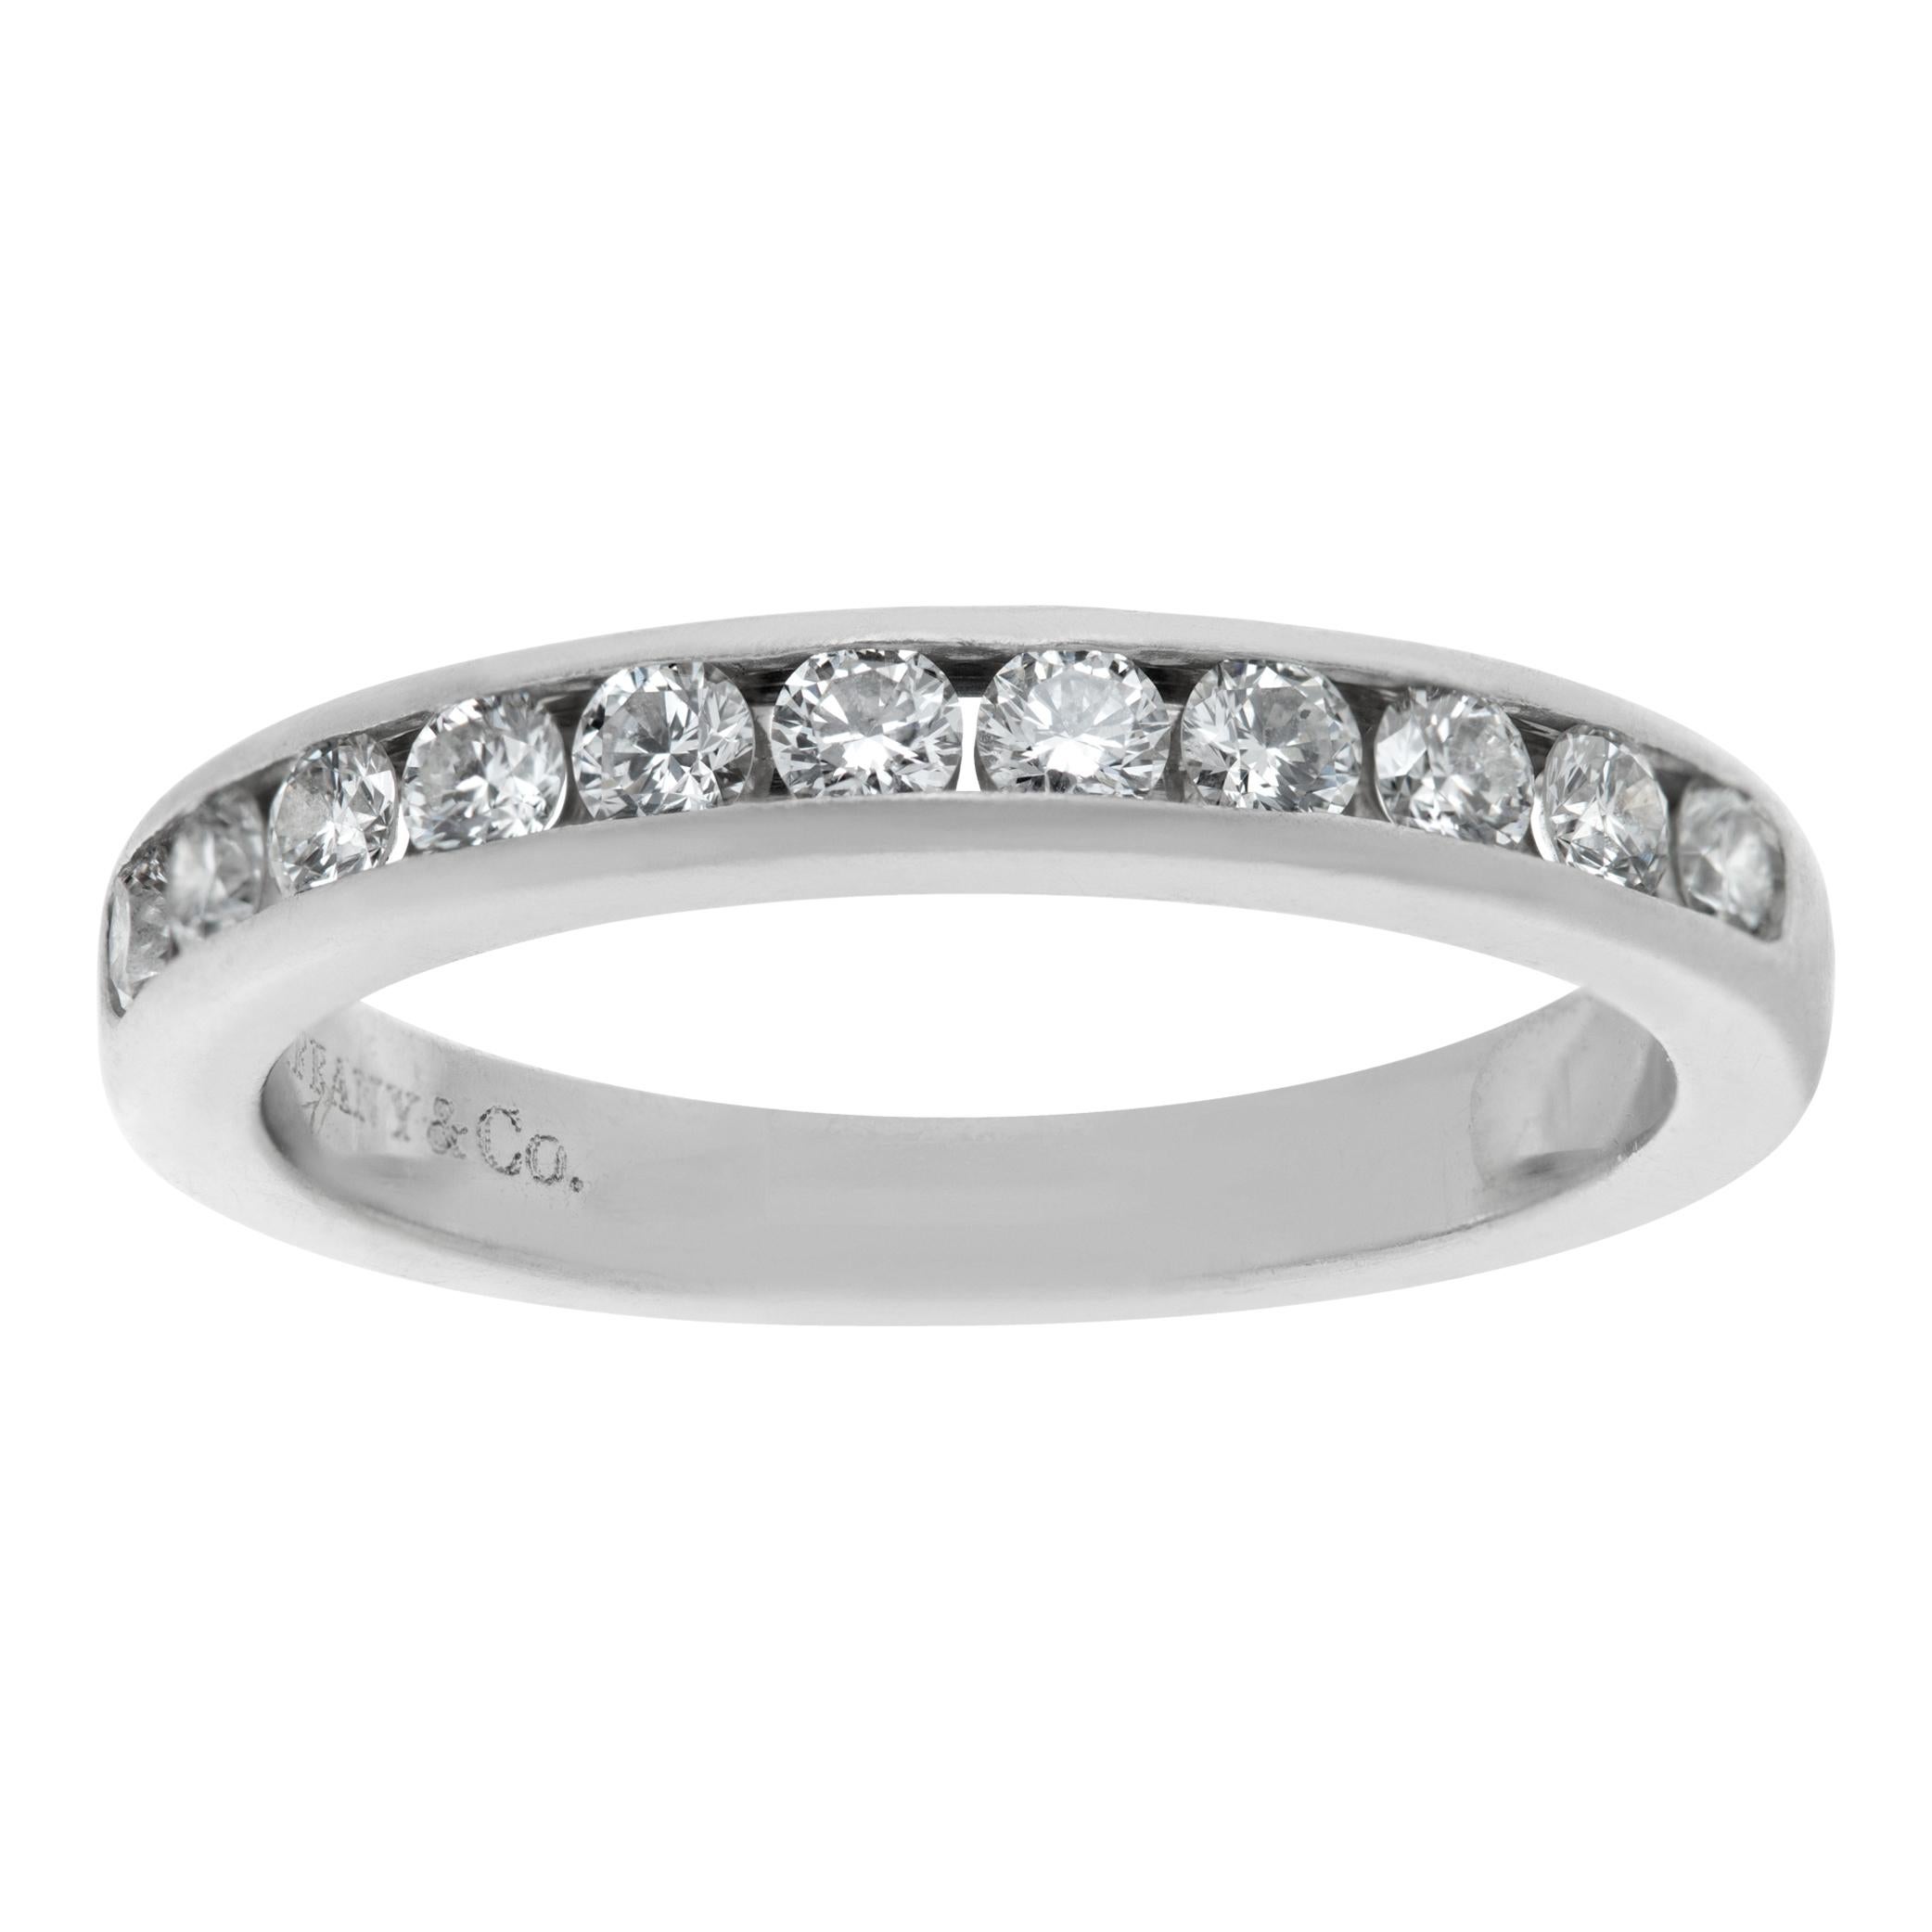 Tiffany & Co. diamond wedding band in platinum with a half-circle of diamonds For Sale